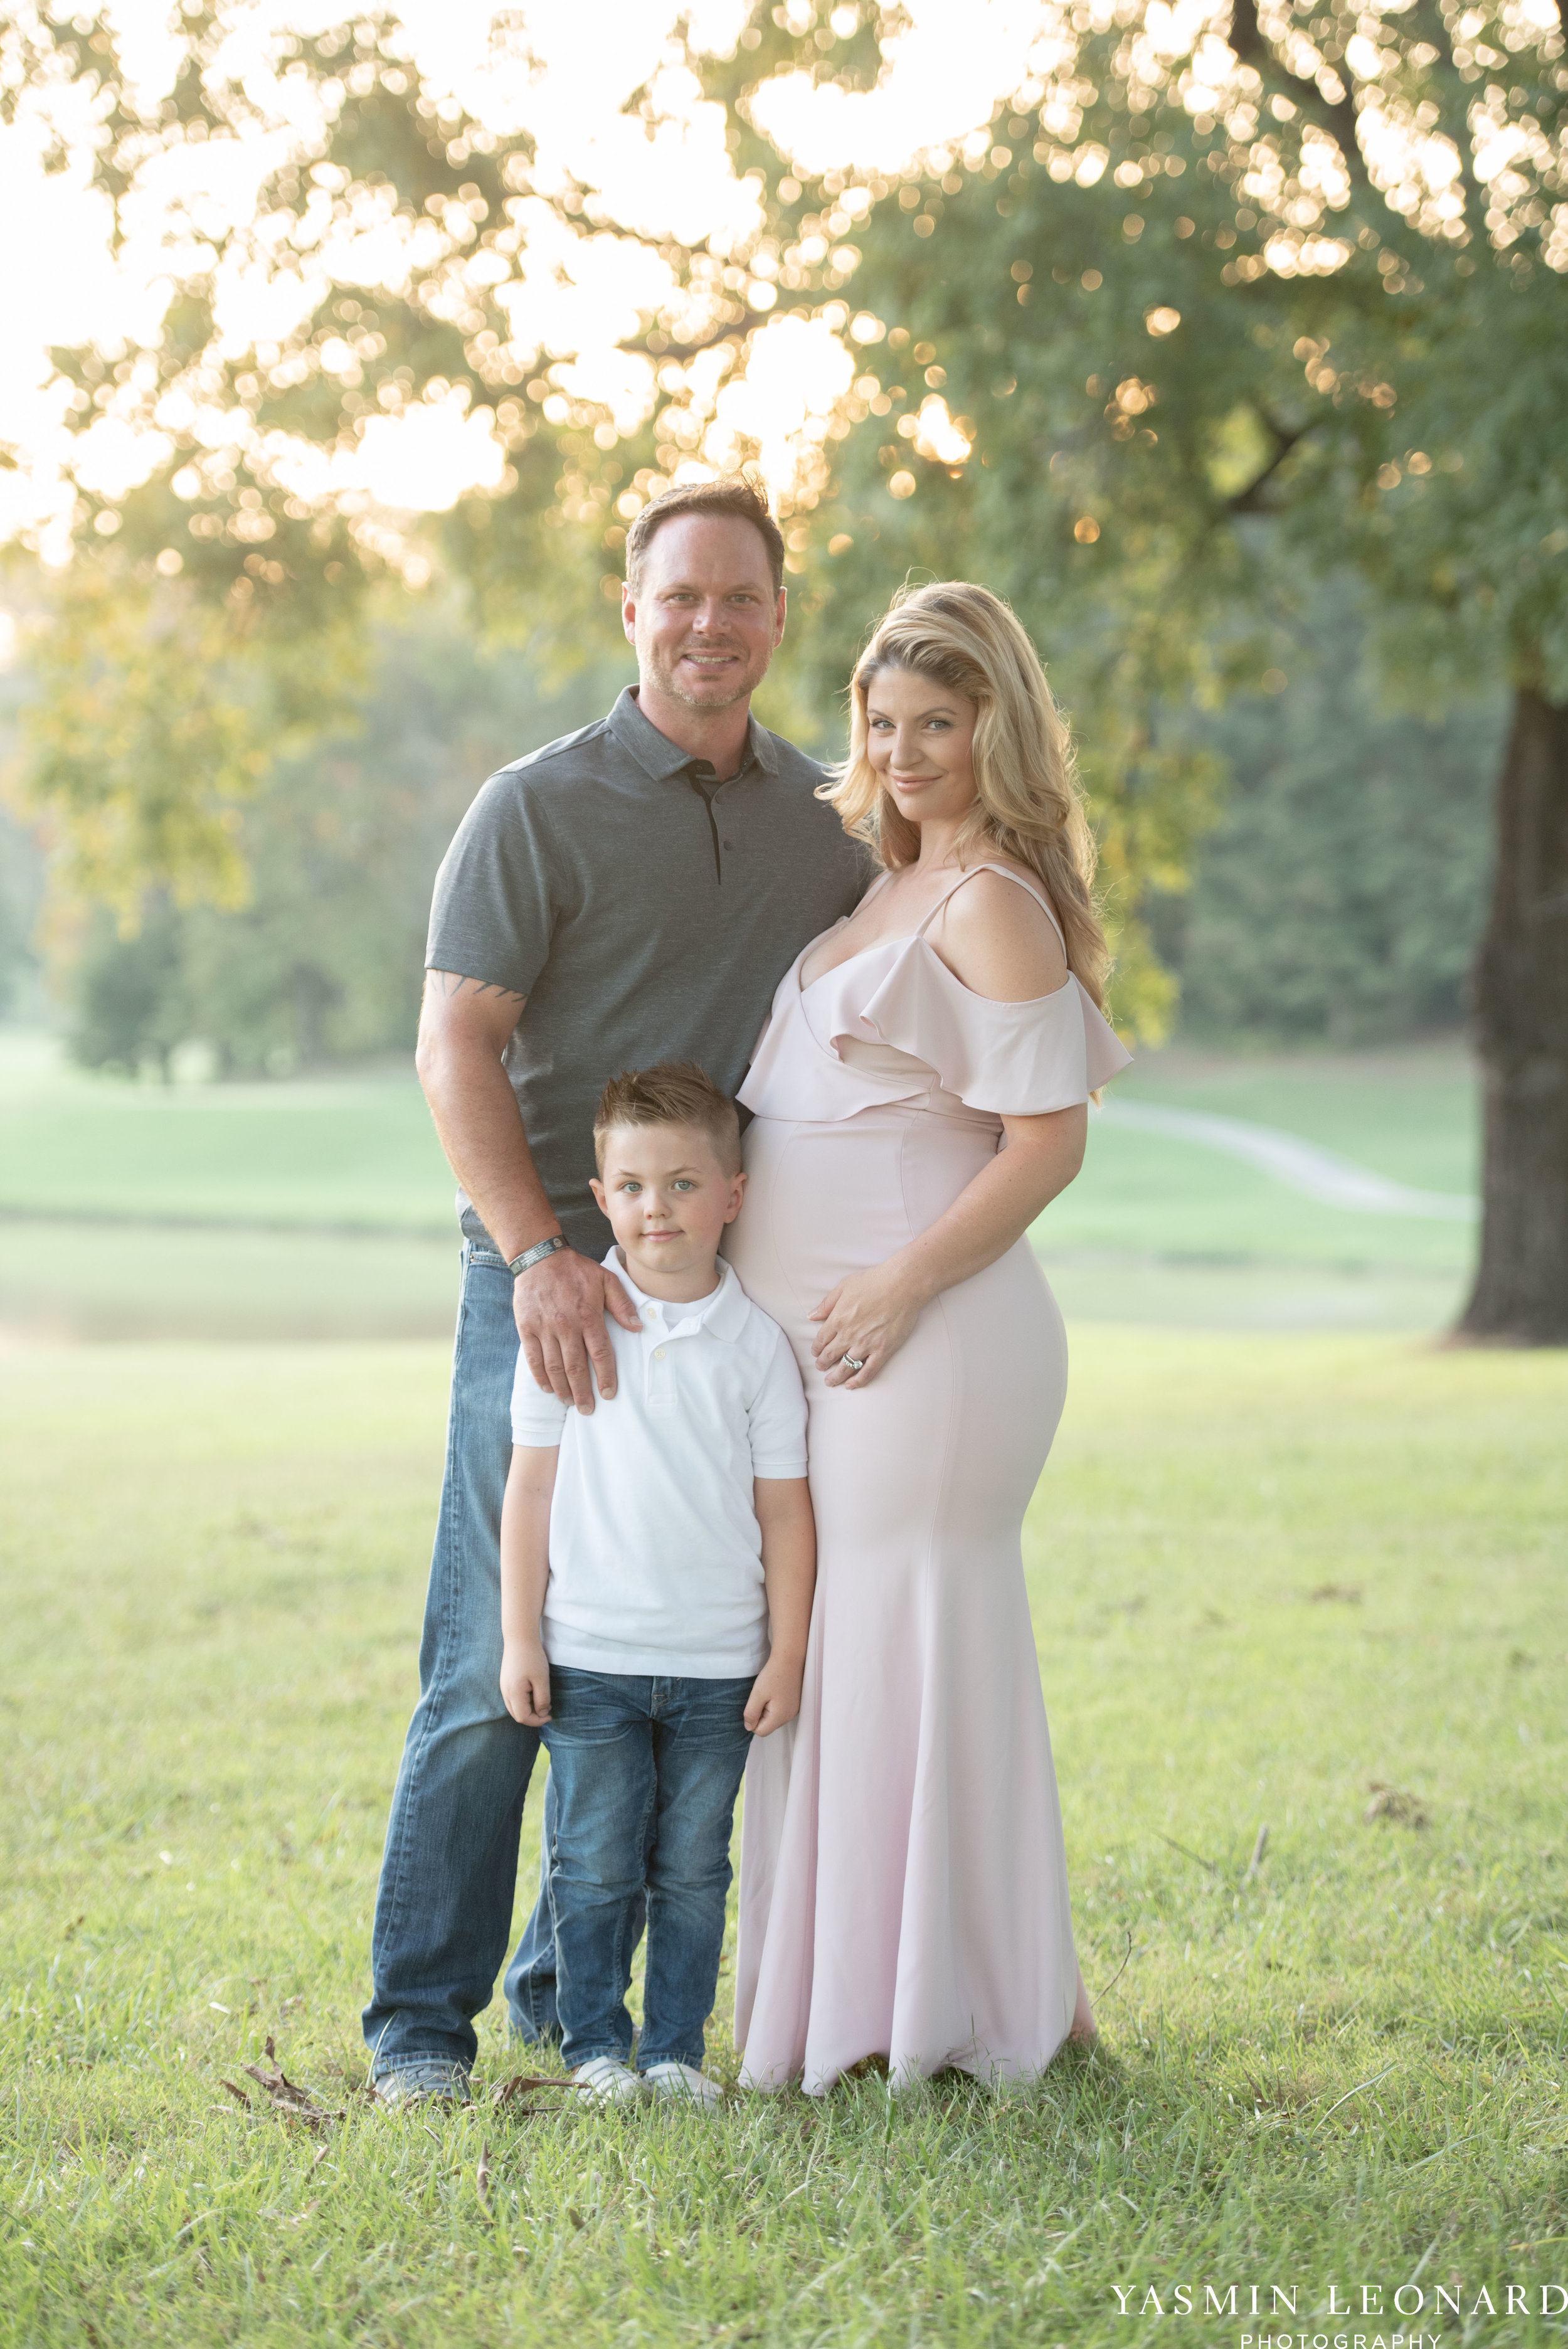 Maternity Session - High Point Maternity Session - NC Family Photographer - NC Photographer - High Point Photographer - Maternity Ideas - Yasmin Leonard Photography-11.jpg